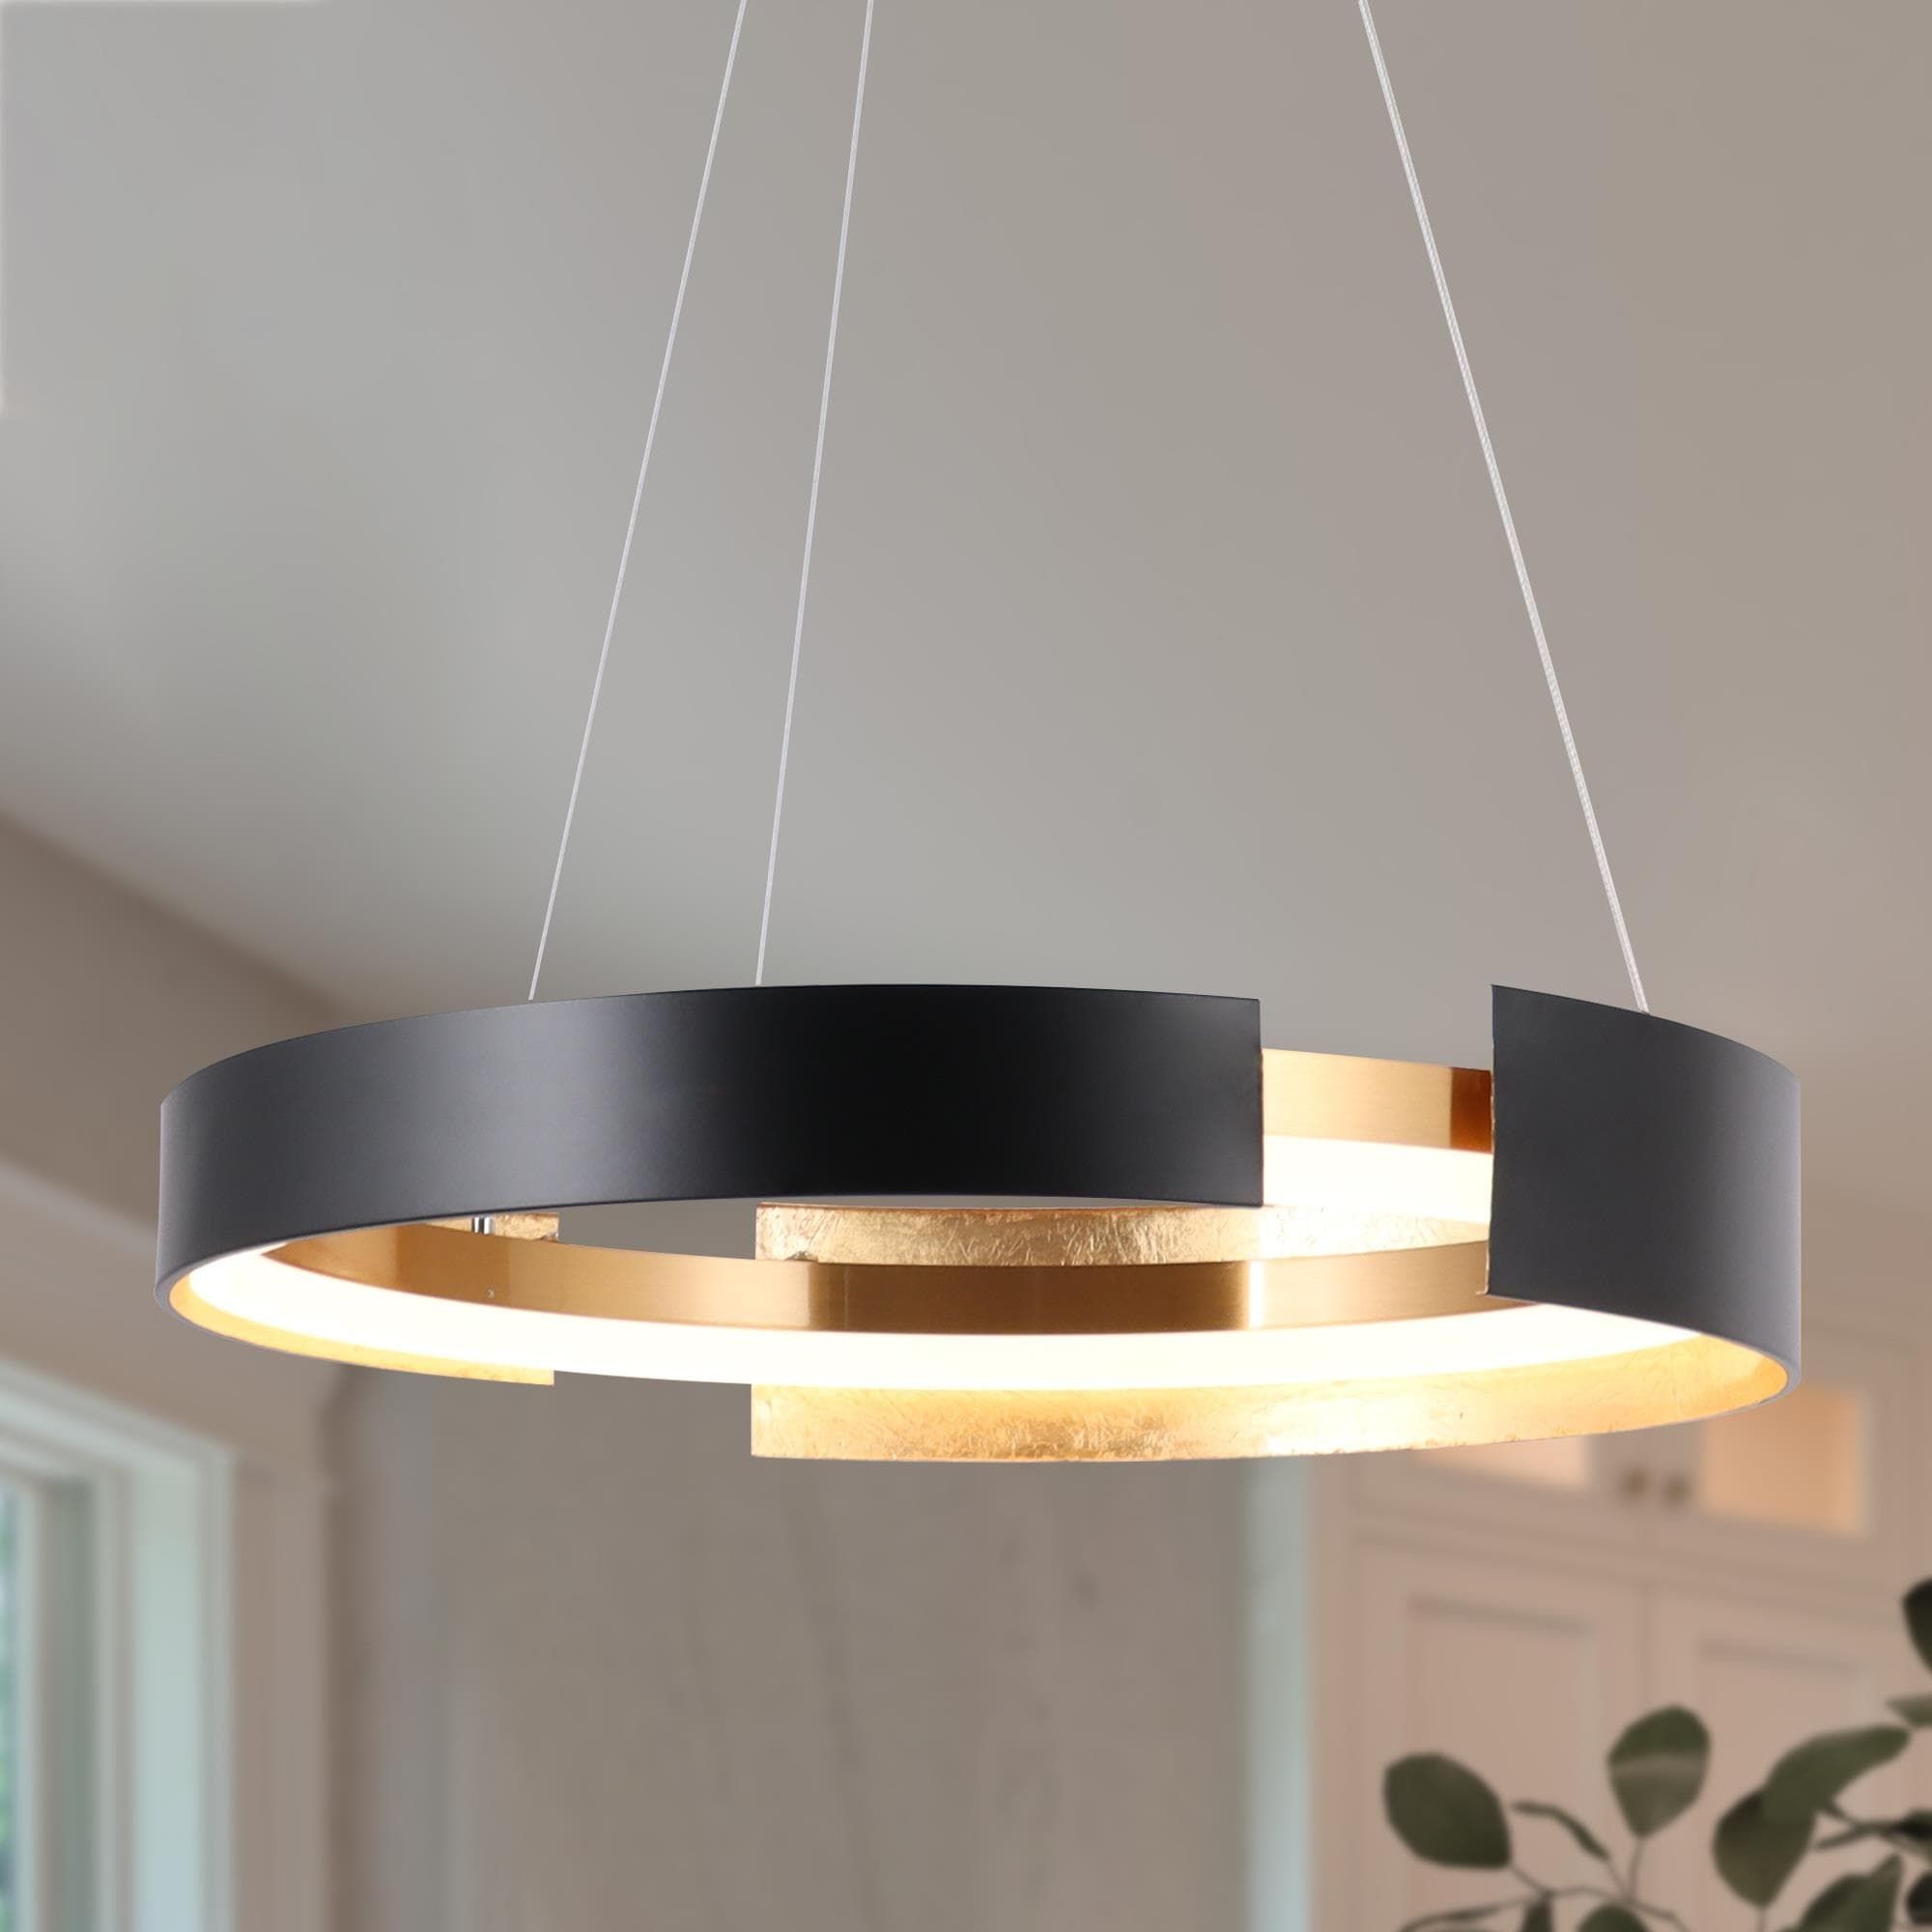 Large Modern Chandelier Lighting Illuminate Your Space with Stylish and Contemporary Chandelier Designs for a Modern Touch